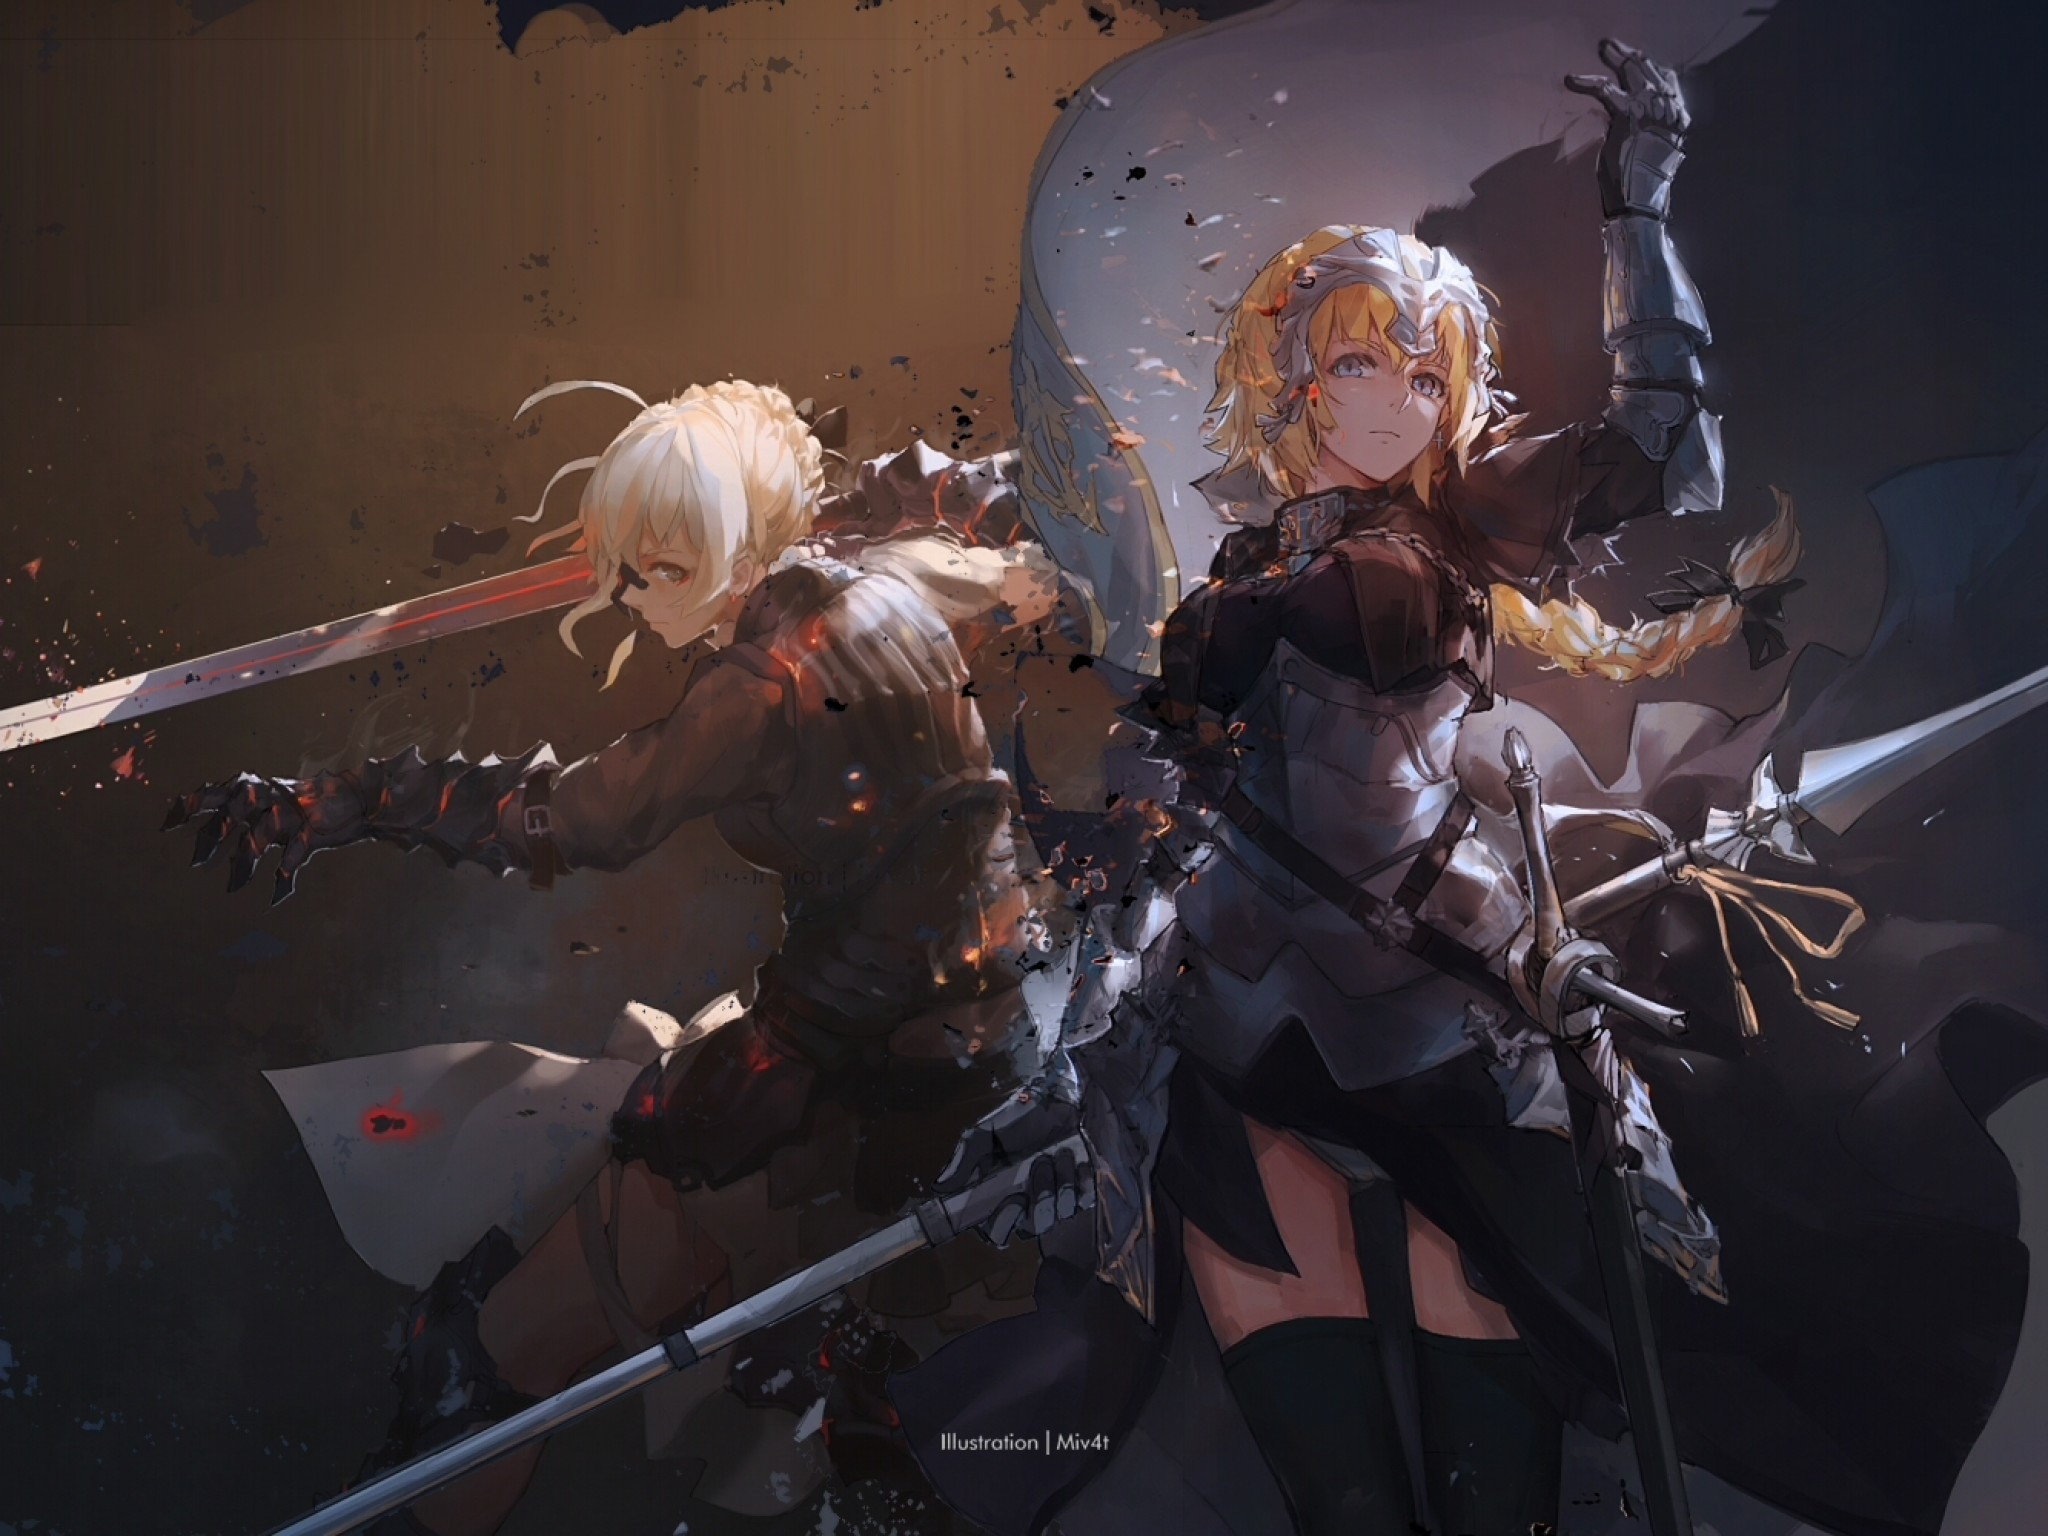 Download 2048x1536 Fate Stay Night, Saber, Armored, Ruler, Fate Apocrypha, Fate Grand Order, #OMGMUCHLOVE Wallpaper for Ainol Novo 9 Spark